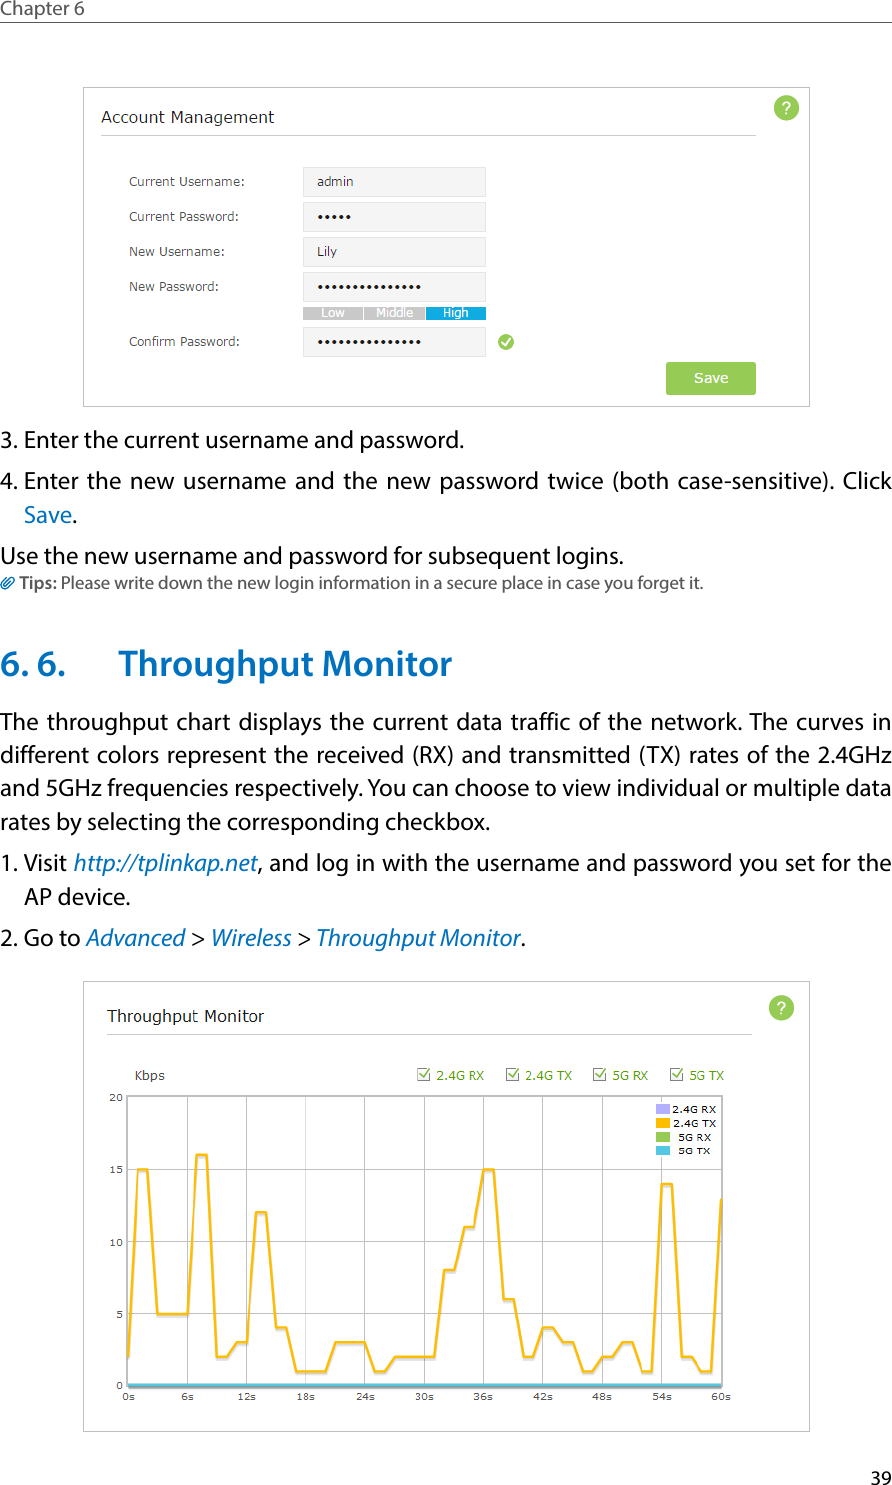 39Chapter 6  3. Enter the current username and password. 4. Enter the new username and the new password twice (both case-sensitive). Click Save.  Use the new username and password for subsequent logins.Tips: Please write down the new login information in a secure place in case you forget it.6. 6.  Throughput MonitorThe throughput chart displays the current data traffic of the network. The curves in different colors represent the received (RX) and transmitted (TX) rates of the 2.4GHz and 5GHz frequencies respectively. You can choose to view individual or multiple data rates by selecting the corresponding checkbox.1. Visit http://tplinkap.net, and log in with the username and password you set for the AP device.2. Go to Advanced &gt; Wireless &gt; Throughput Monitor.